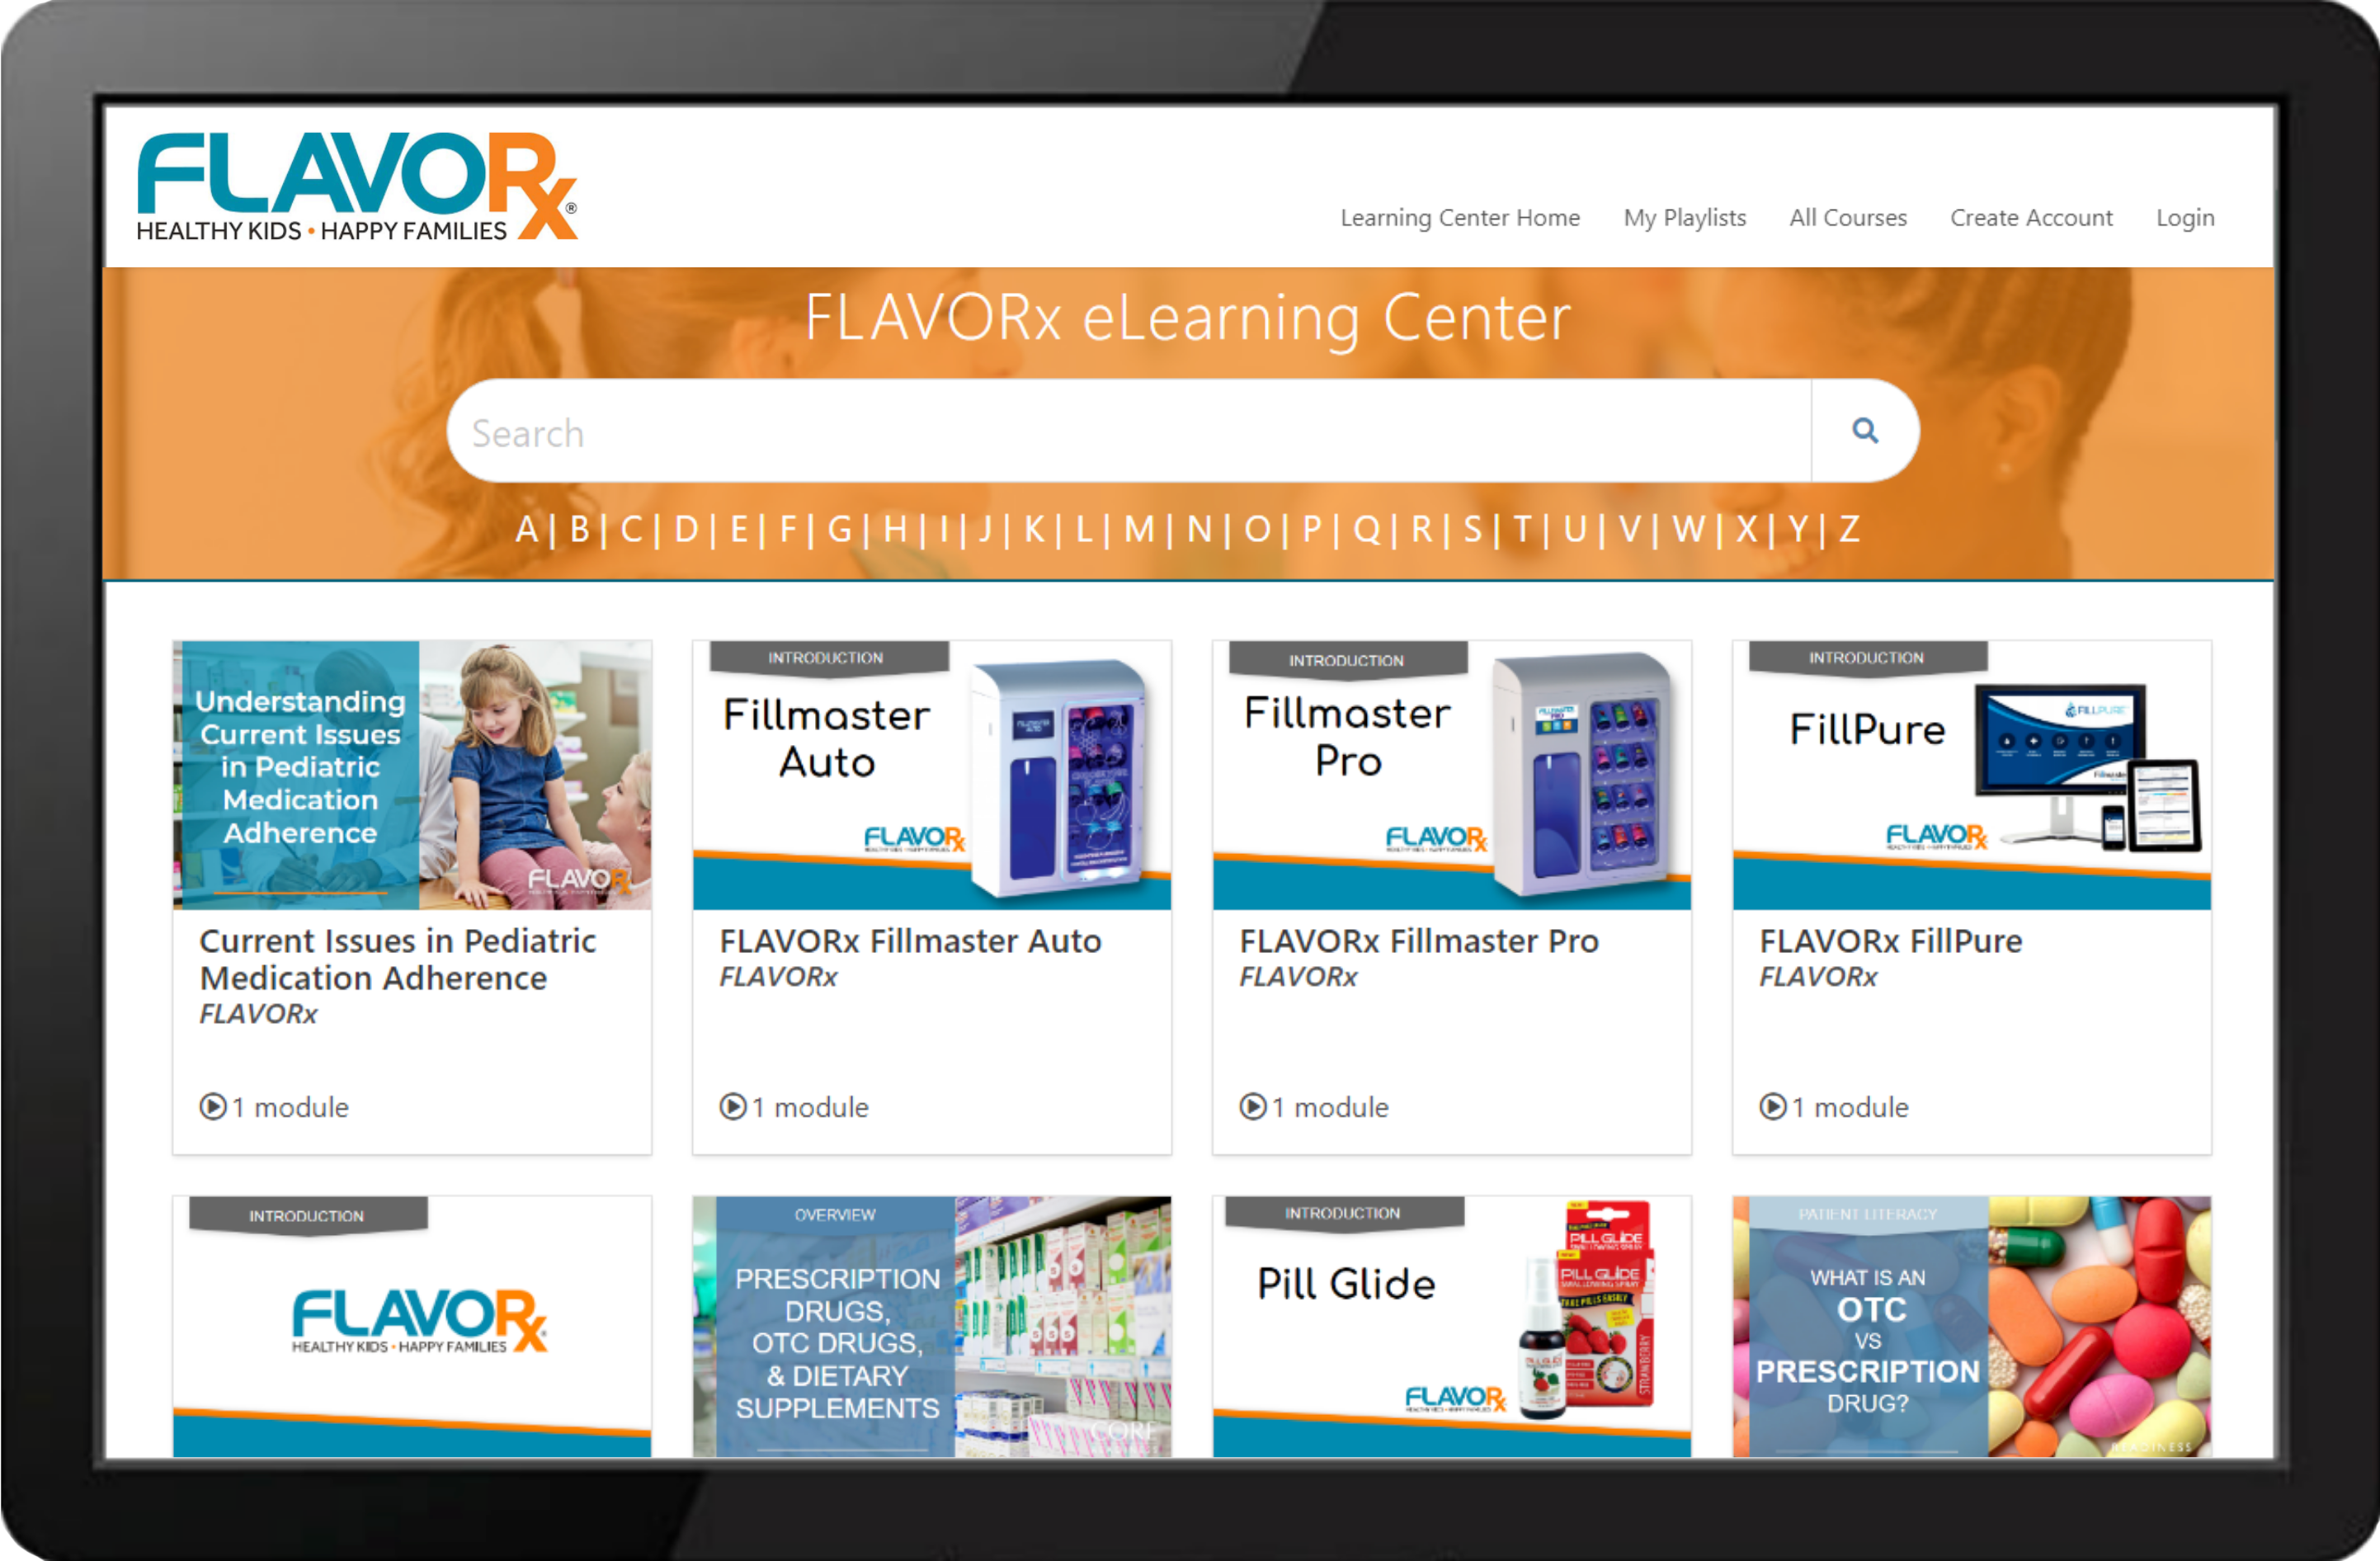 FLAVORx LearningCenter Example